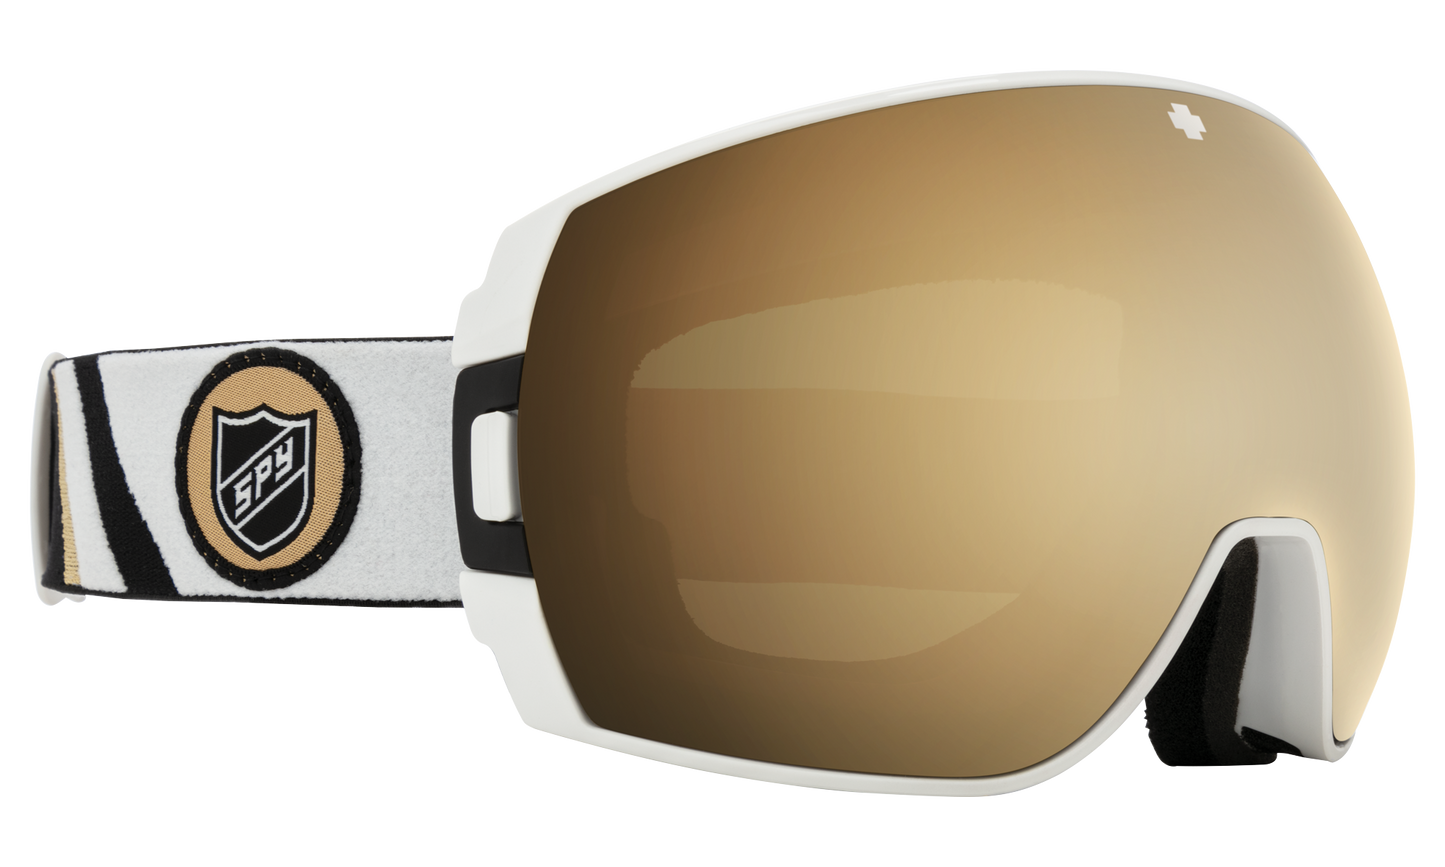 SPY Legacy Snow Goggle Goggles  HD Plus Bronze with Gold Spectra Mirror + HD Plus LL Persimmon with Silver Spectra Mirror SPY + Tom Wallisch One Size